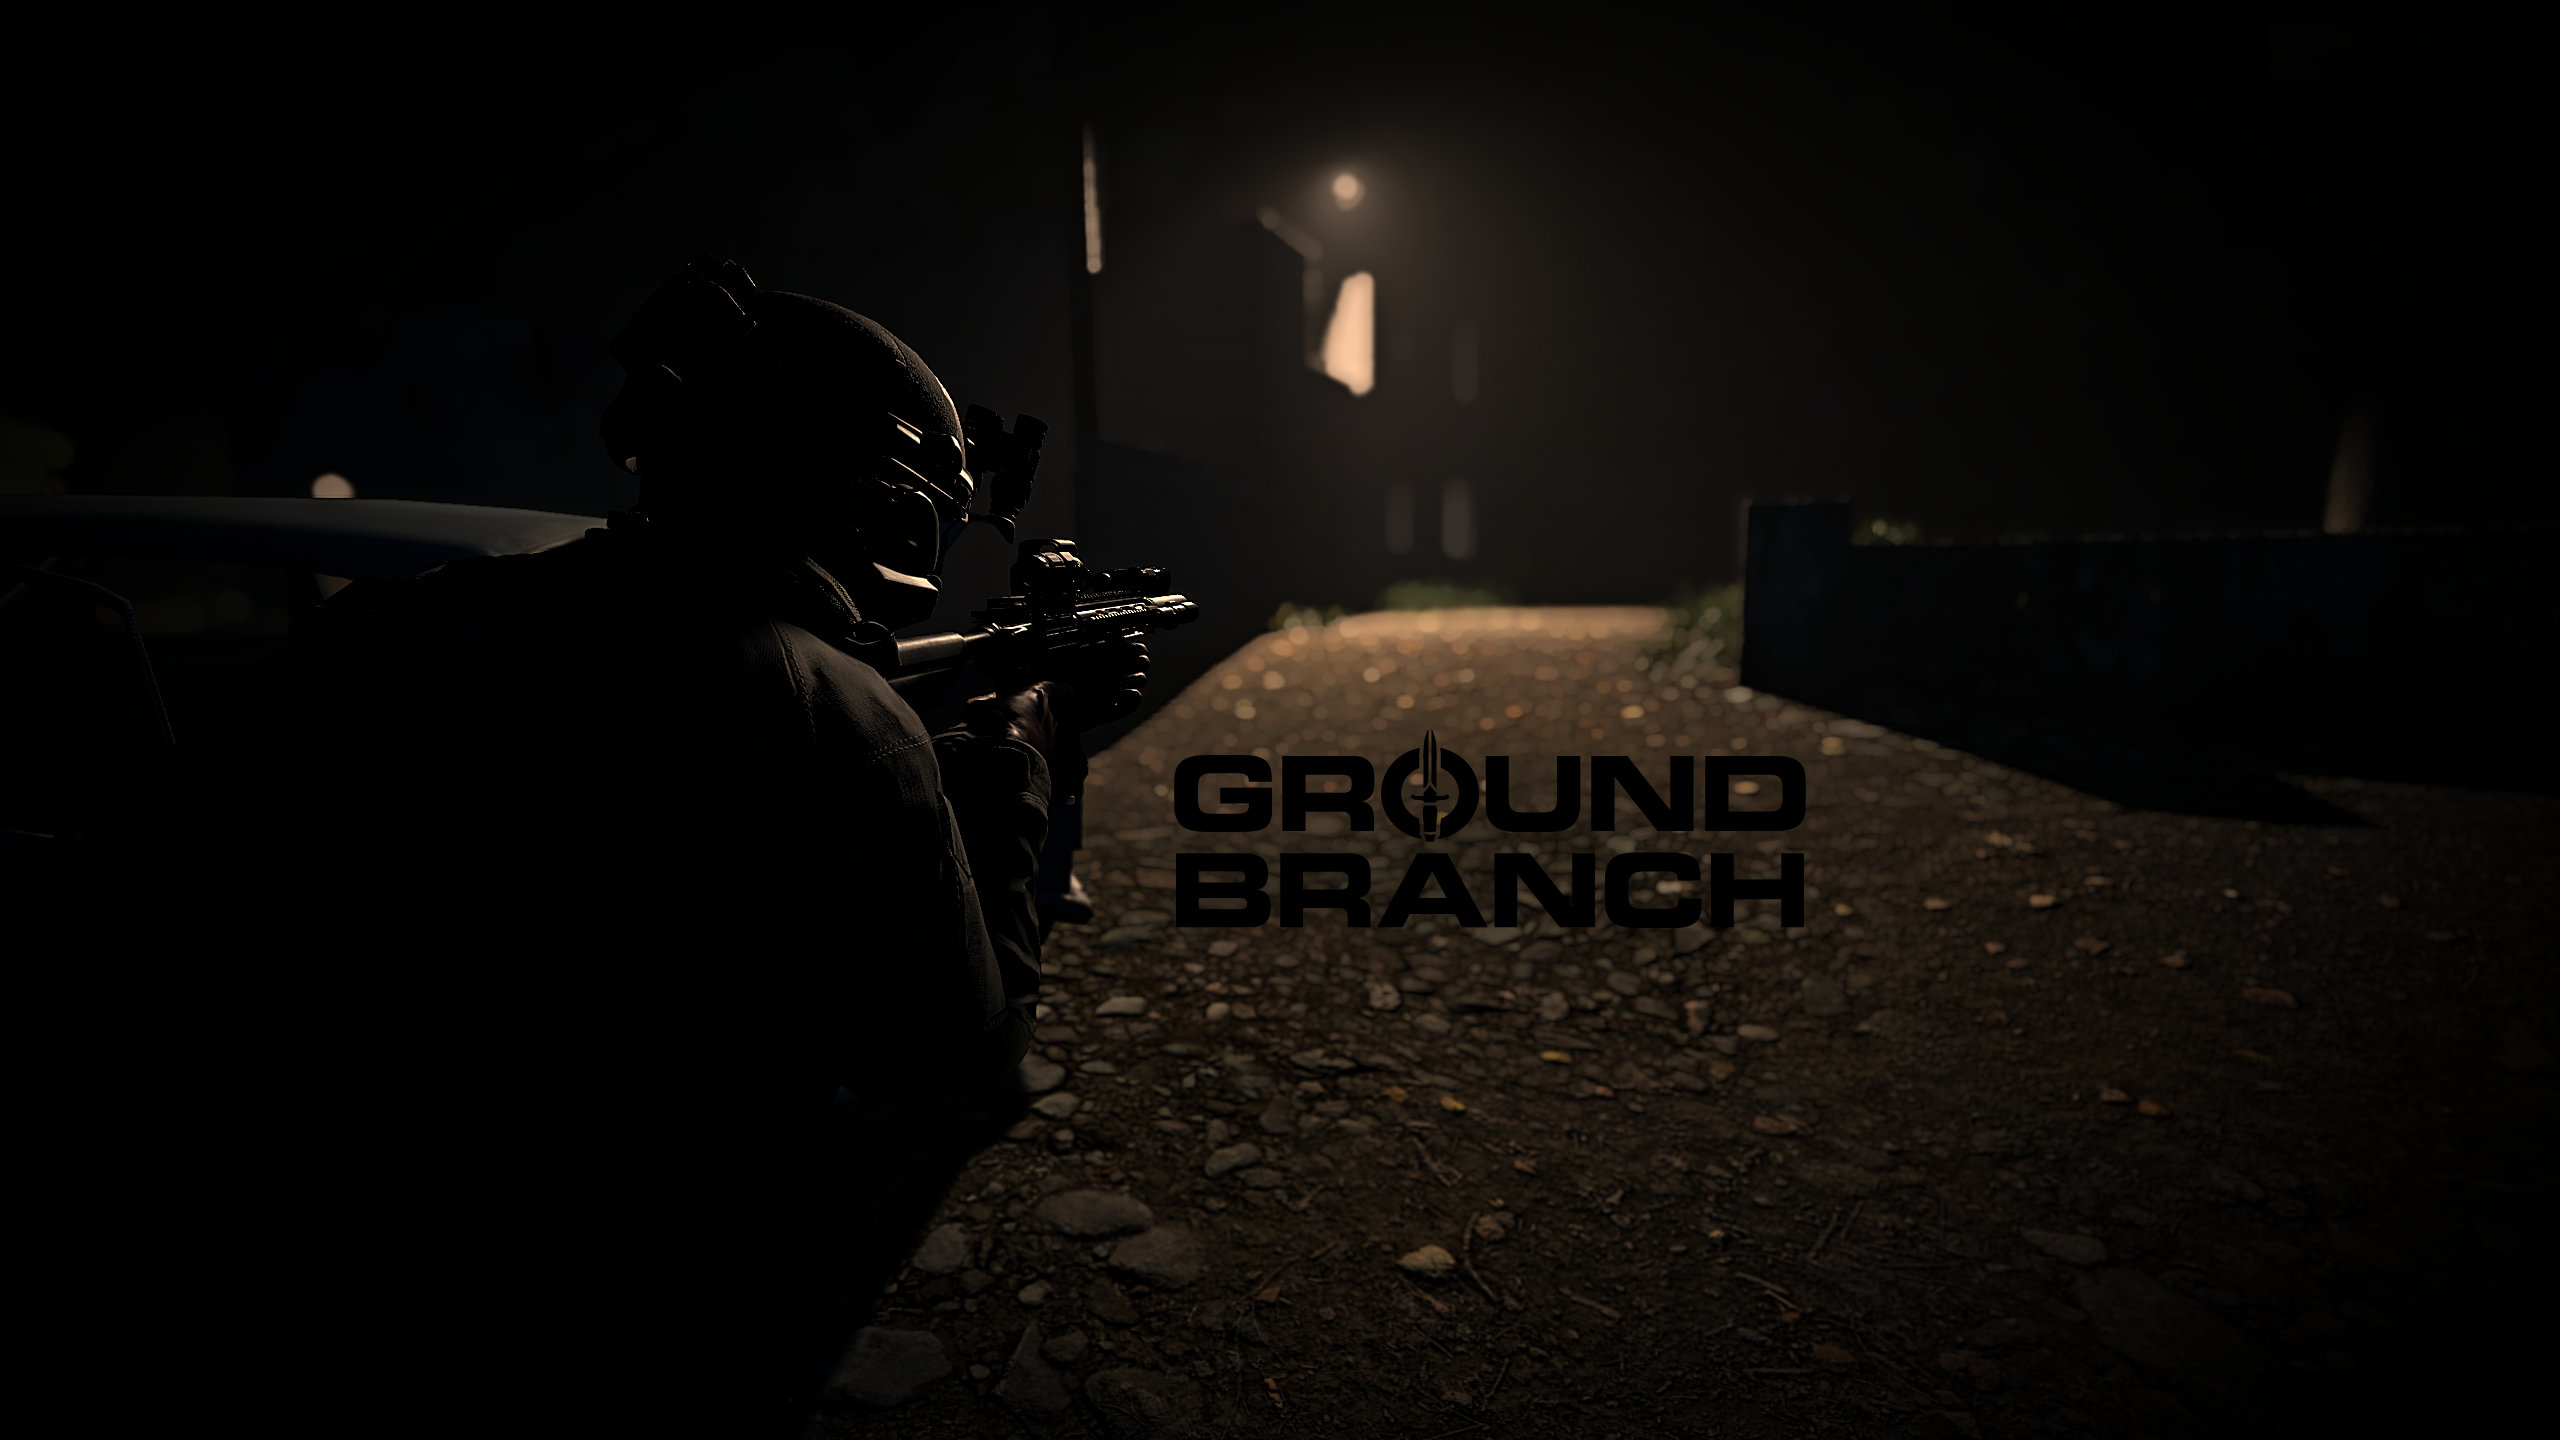 About the Game. UNOFFICIAL GROUND BRANCH WIKI